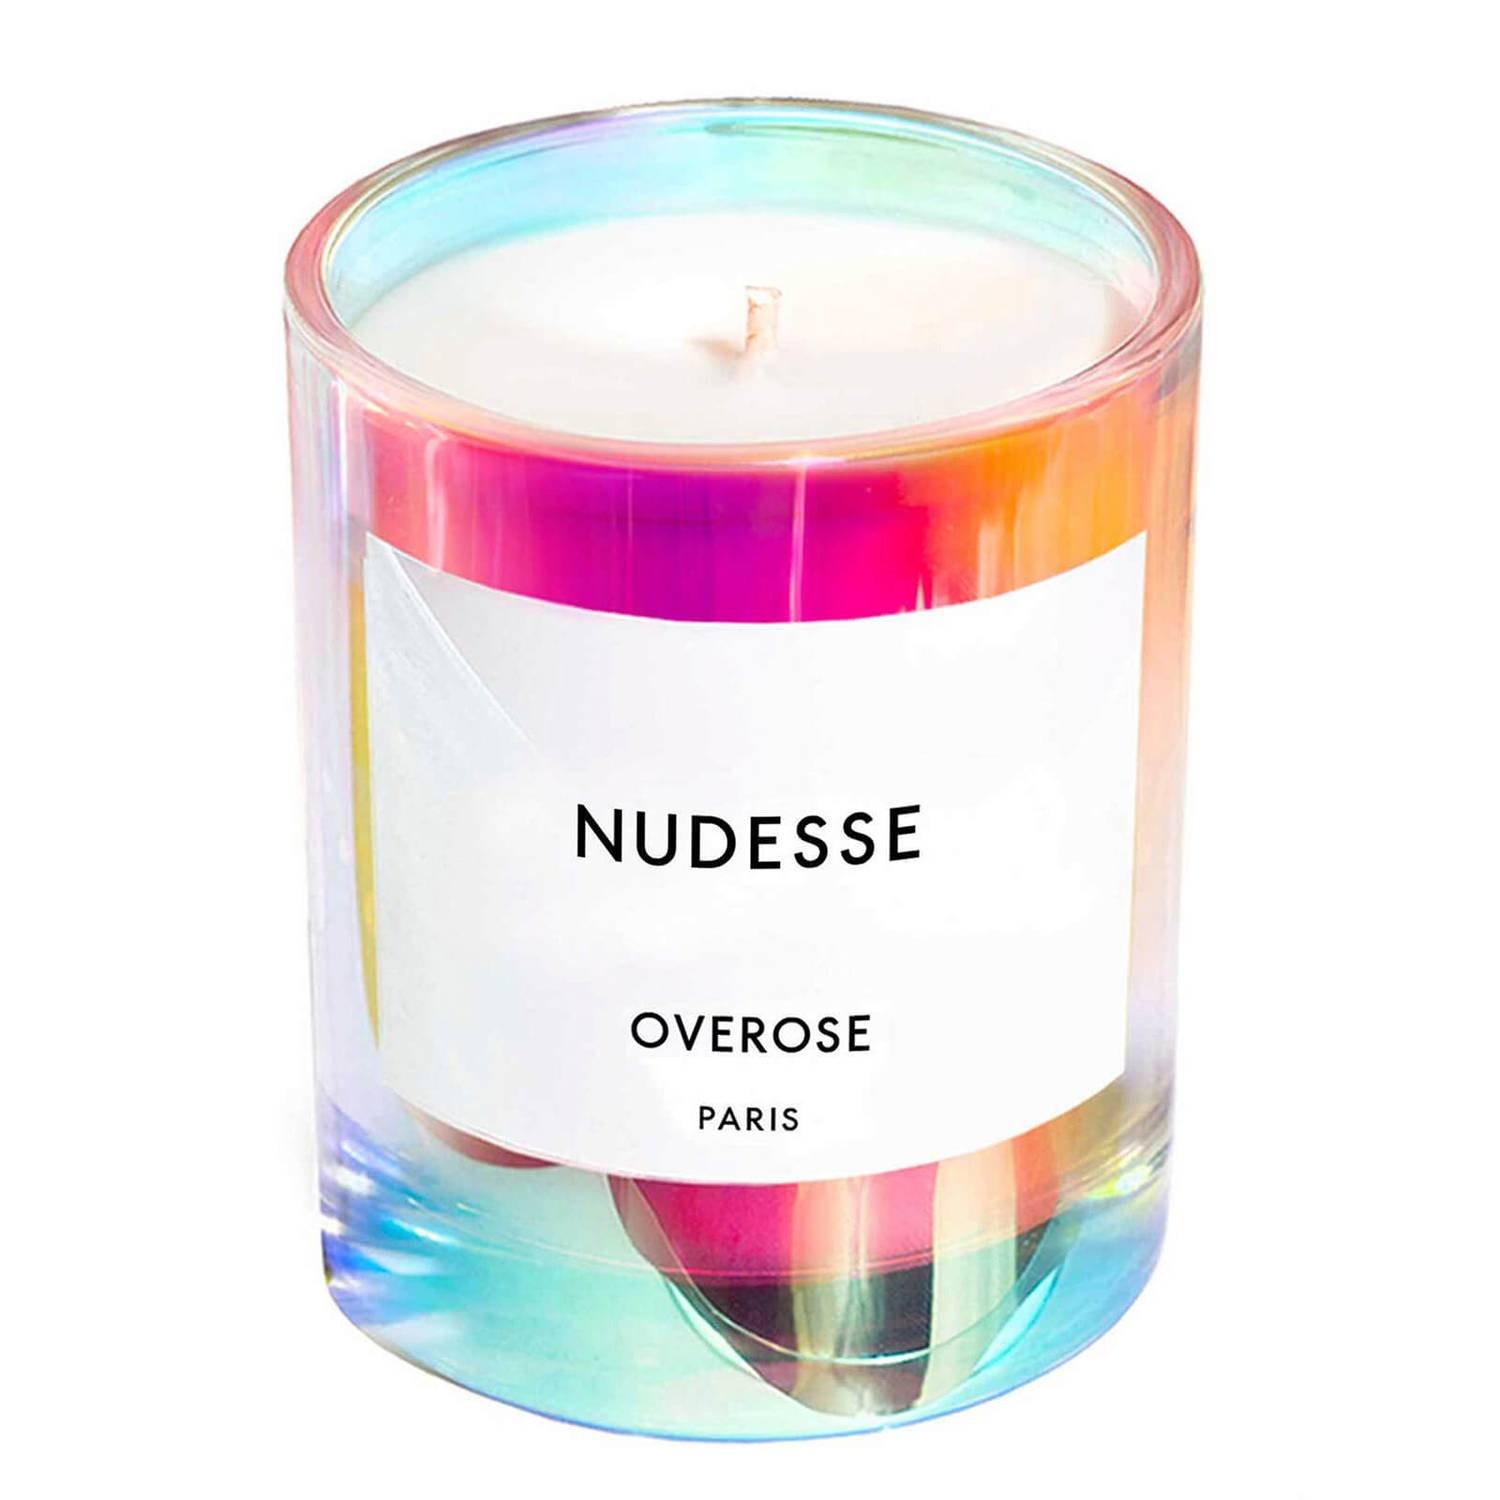  Candle Gift Guide, Best Smelling Candles, A Gift That Lasts Long In The Memory, Designer Candles That Look Good In Any Home, The Coolest Candles Around, Trendsetting Candles To Give As A Gift, Beautiful Smelling Candles, Treat Yourself To A Super Lu